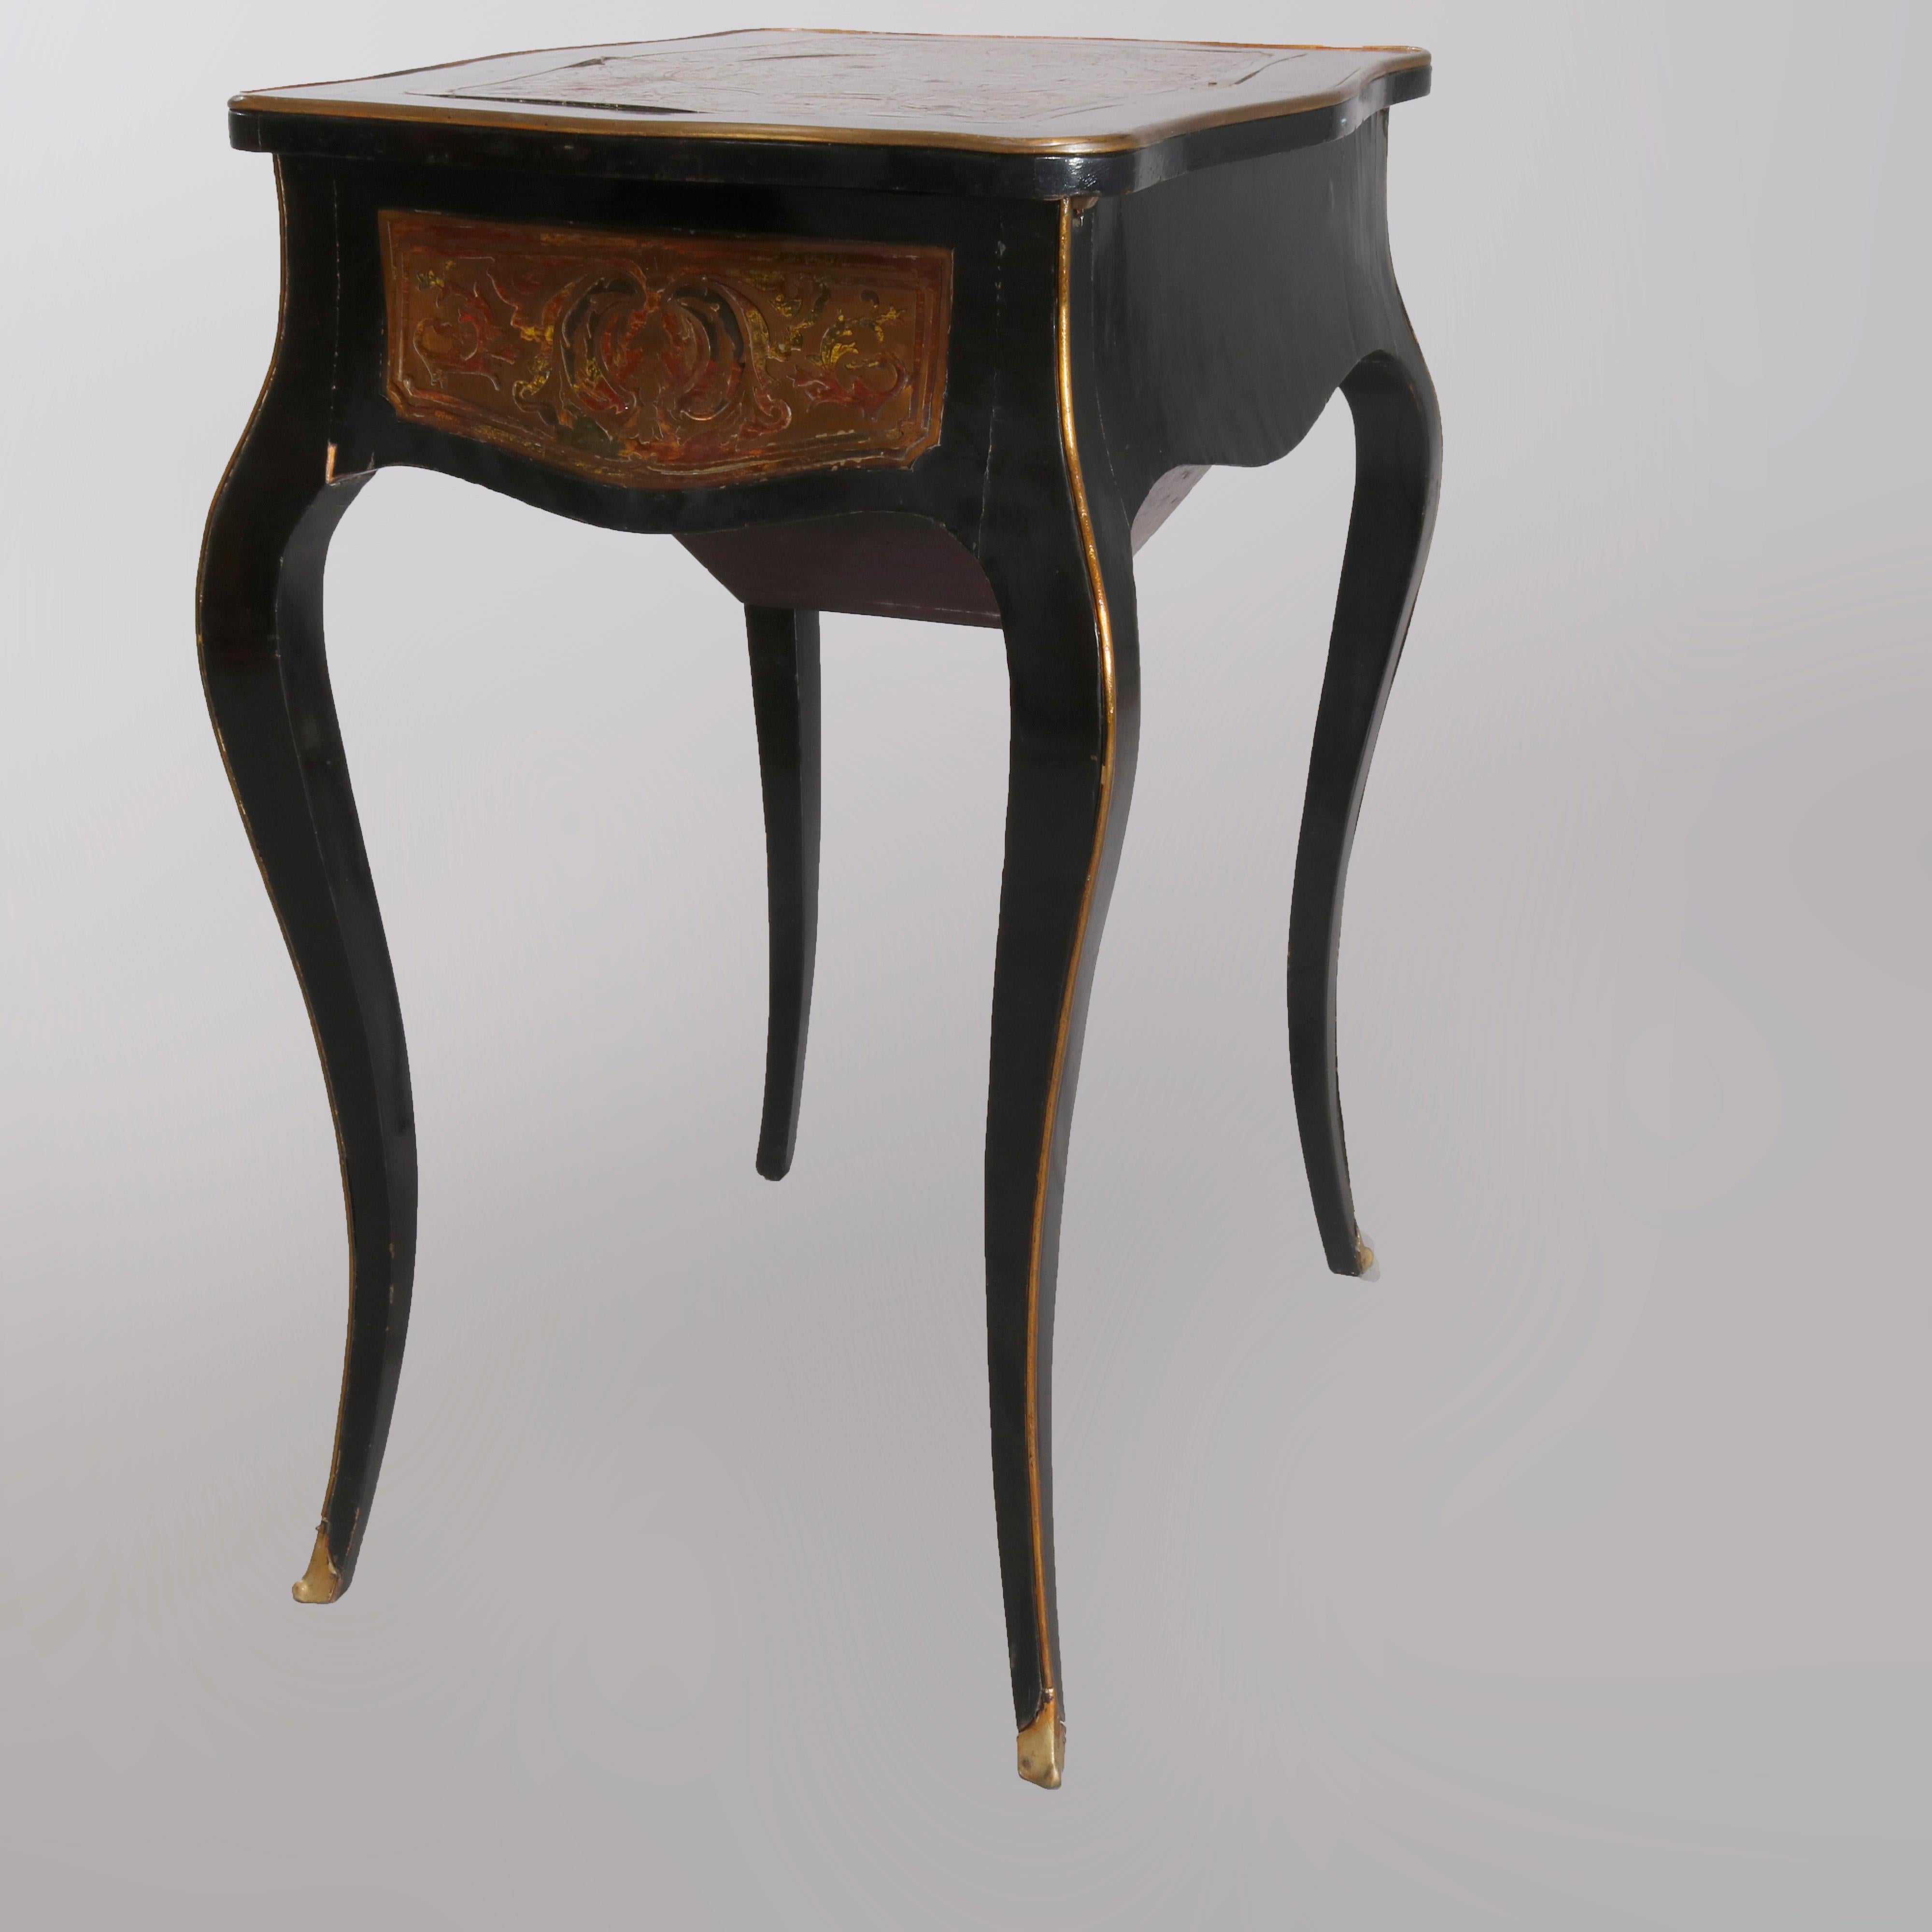 An antique Napoleon III Boulle & Tortoise shell sewing stand offers ebonized case with top having mirrored interior opening to compartments surmounting lower drawer and raised on cabriole legs, gilt highlights throughout, circa 1870

Measures- 29